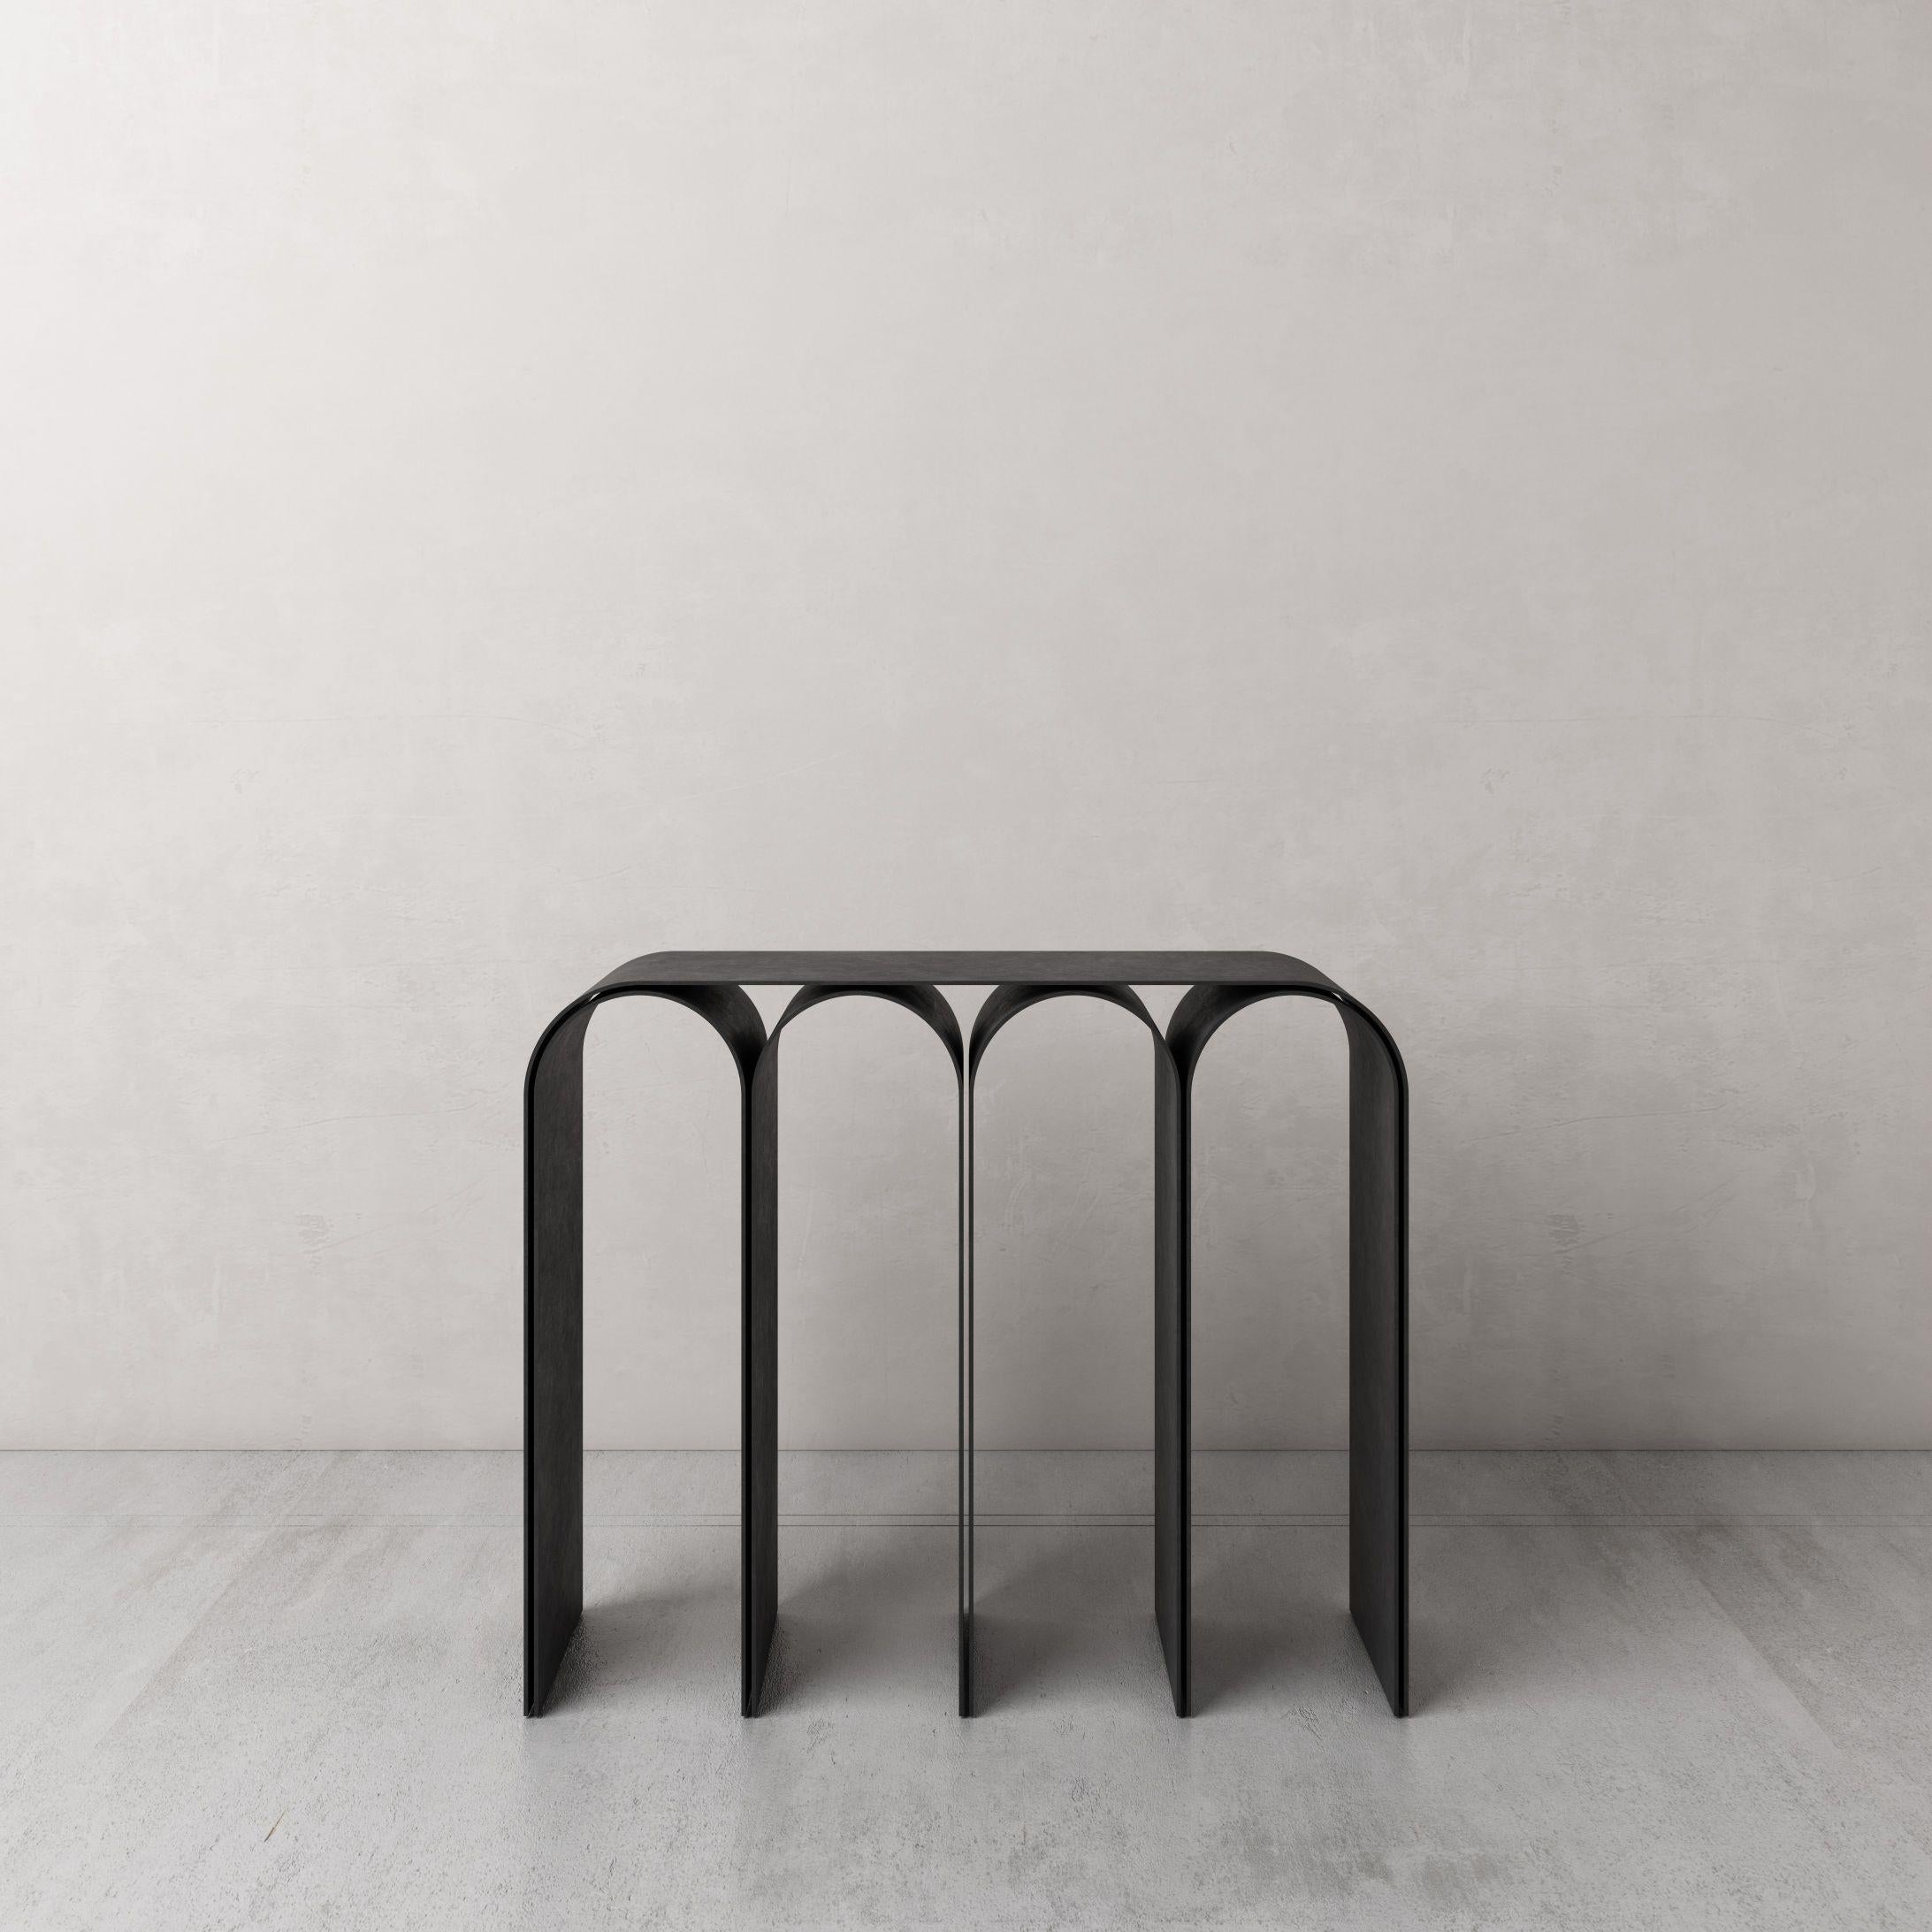 Gold arch console by Pietro Franceschini
Sold exclusively by Galerie Philia
Manufacturer: Prinzivalli
Dimensions: W 103 x L 30 x H 86 cm
Materials: Steel (Black finish)

Also available:
Steel (brass finish, blackened, satin, polished)
Brass